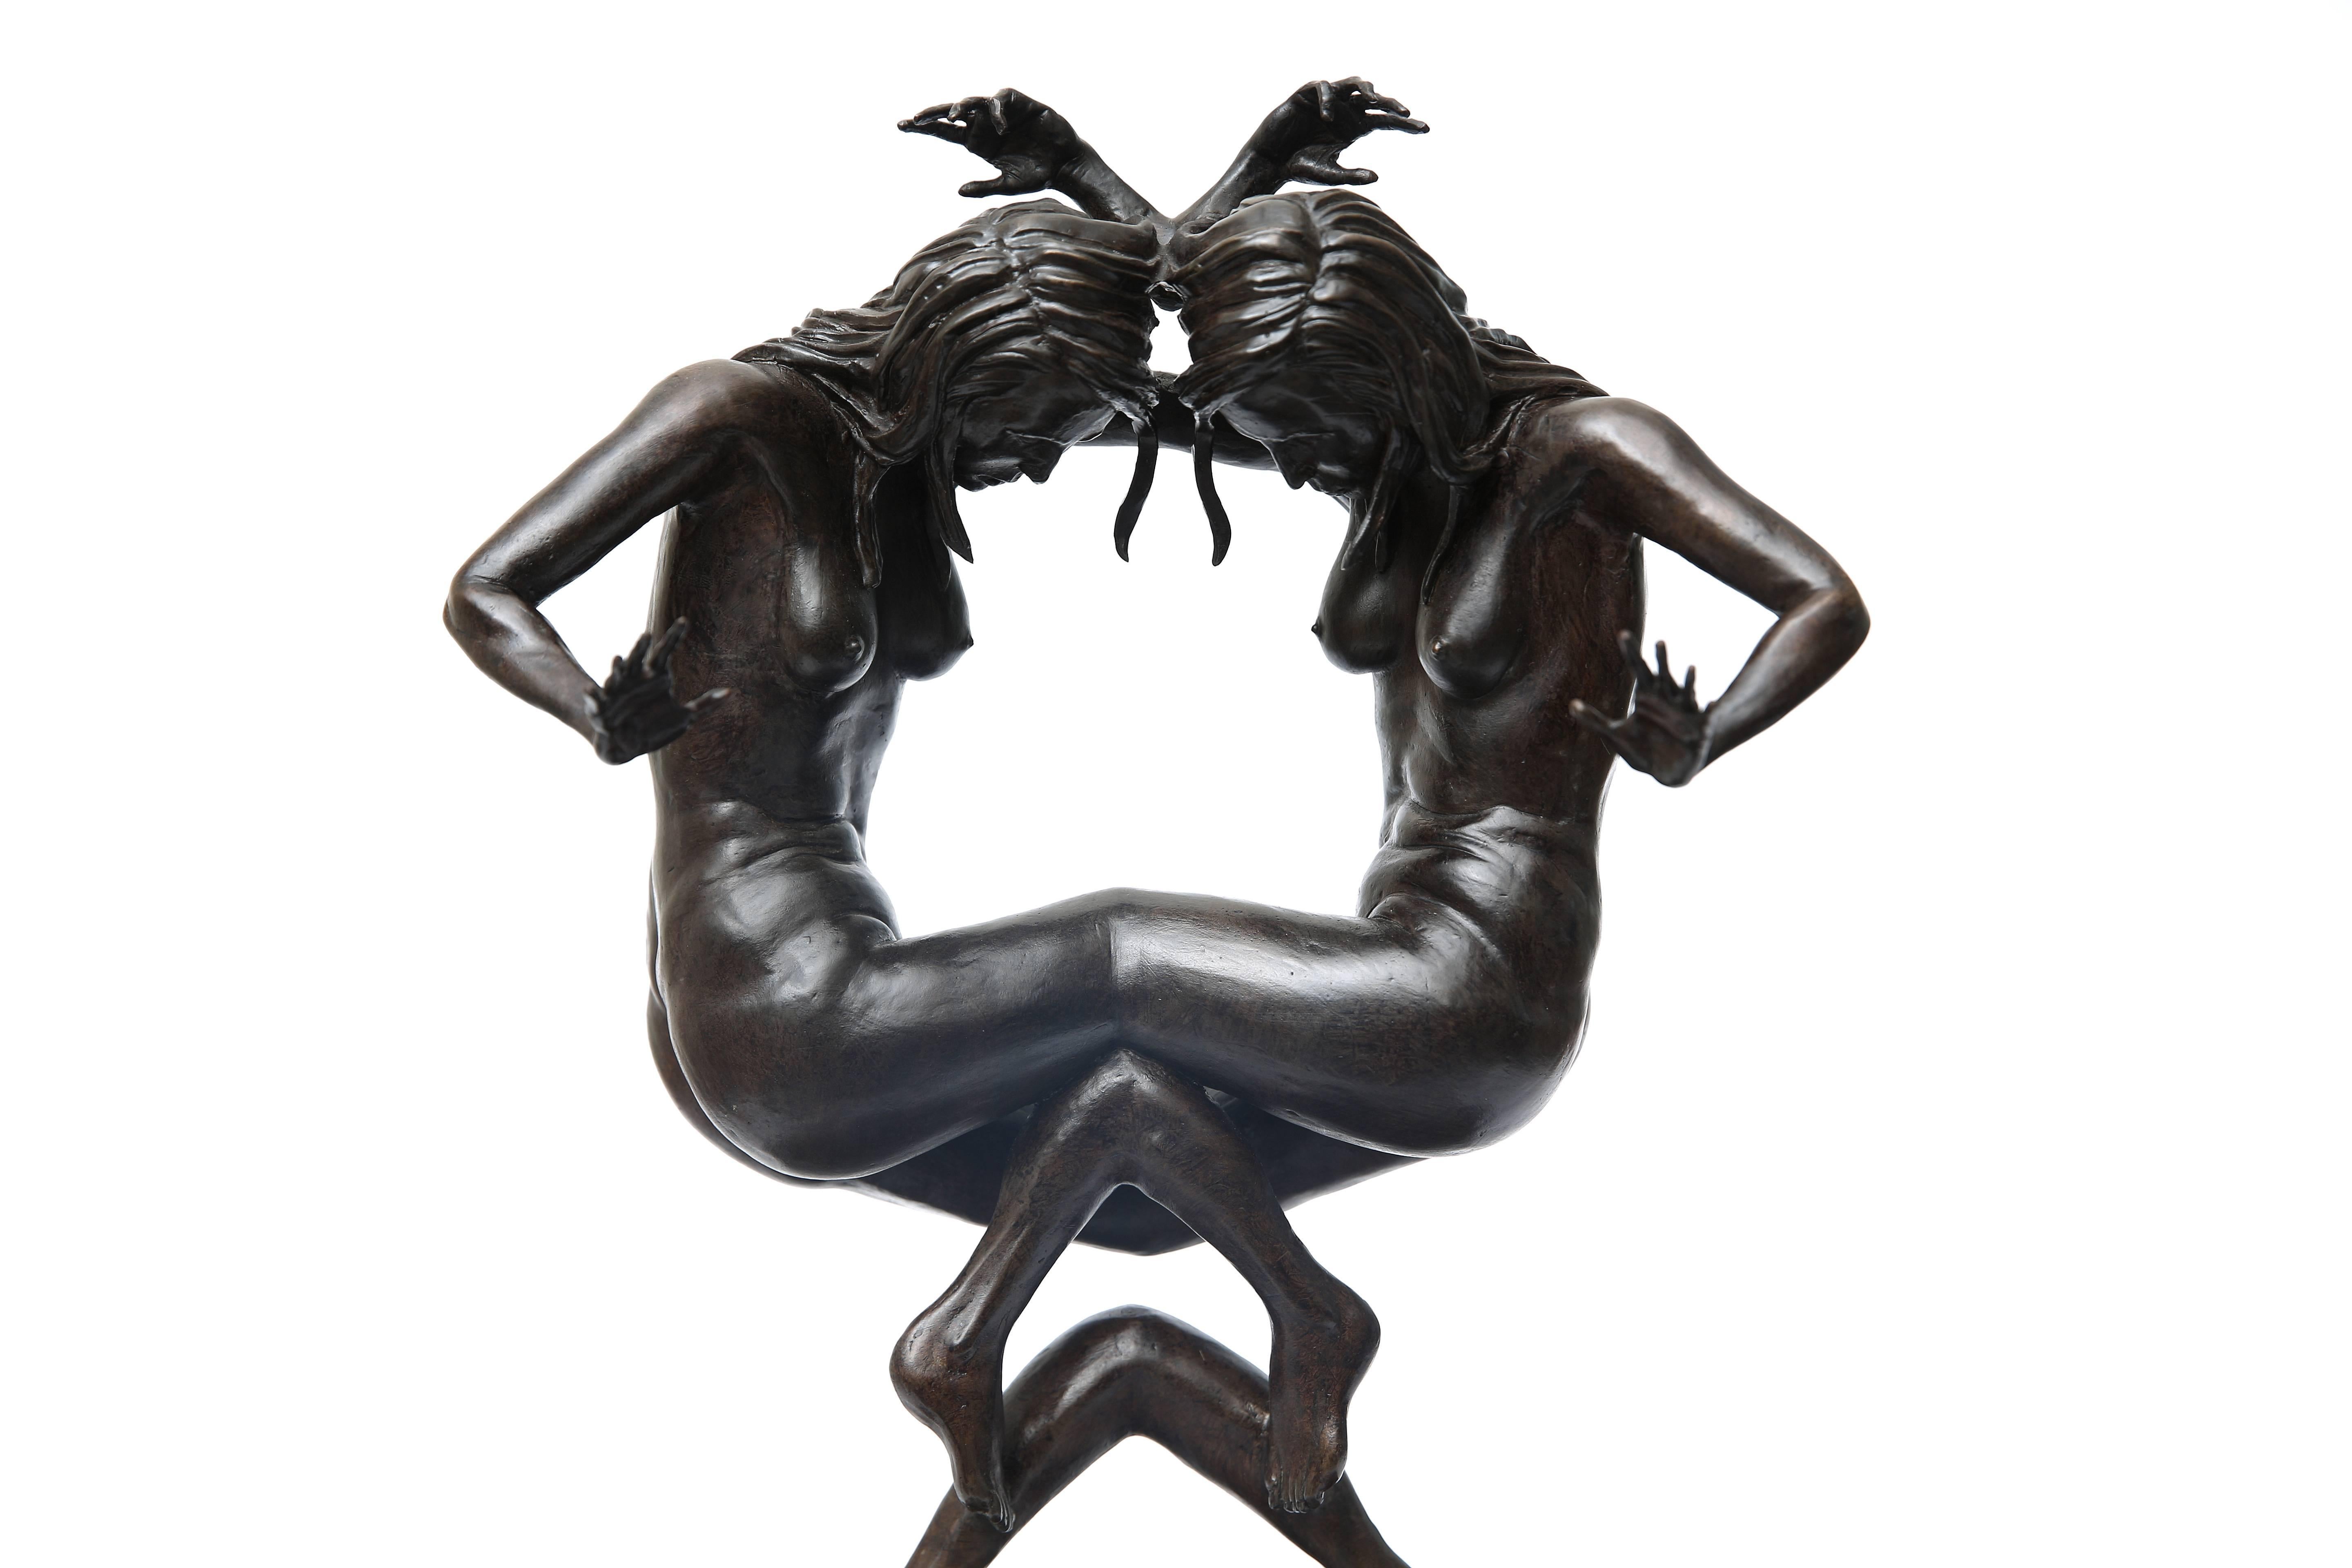 Hobbes Vincent 
Mirror Female
2016
Bronze sculpture 
19in W x 19in D x 21in H  
Edition of 12  
Acquired directly from artist.    

Hobbes Vincent is one of the Dallas art world's most treasured enigmas. Born in Mexico, then (as he tells it)